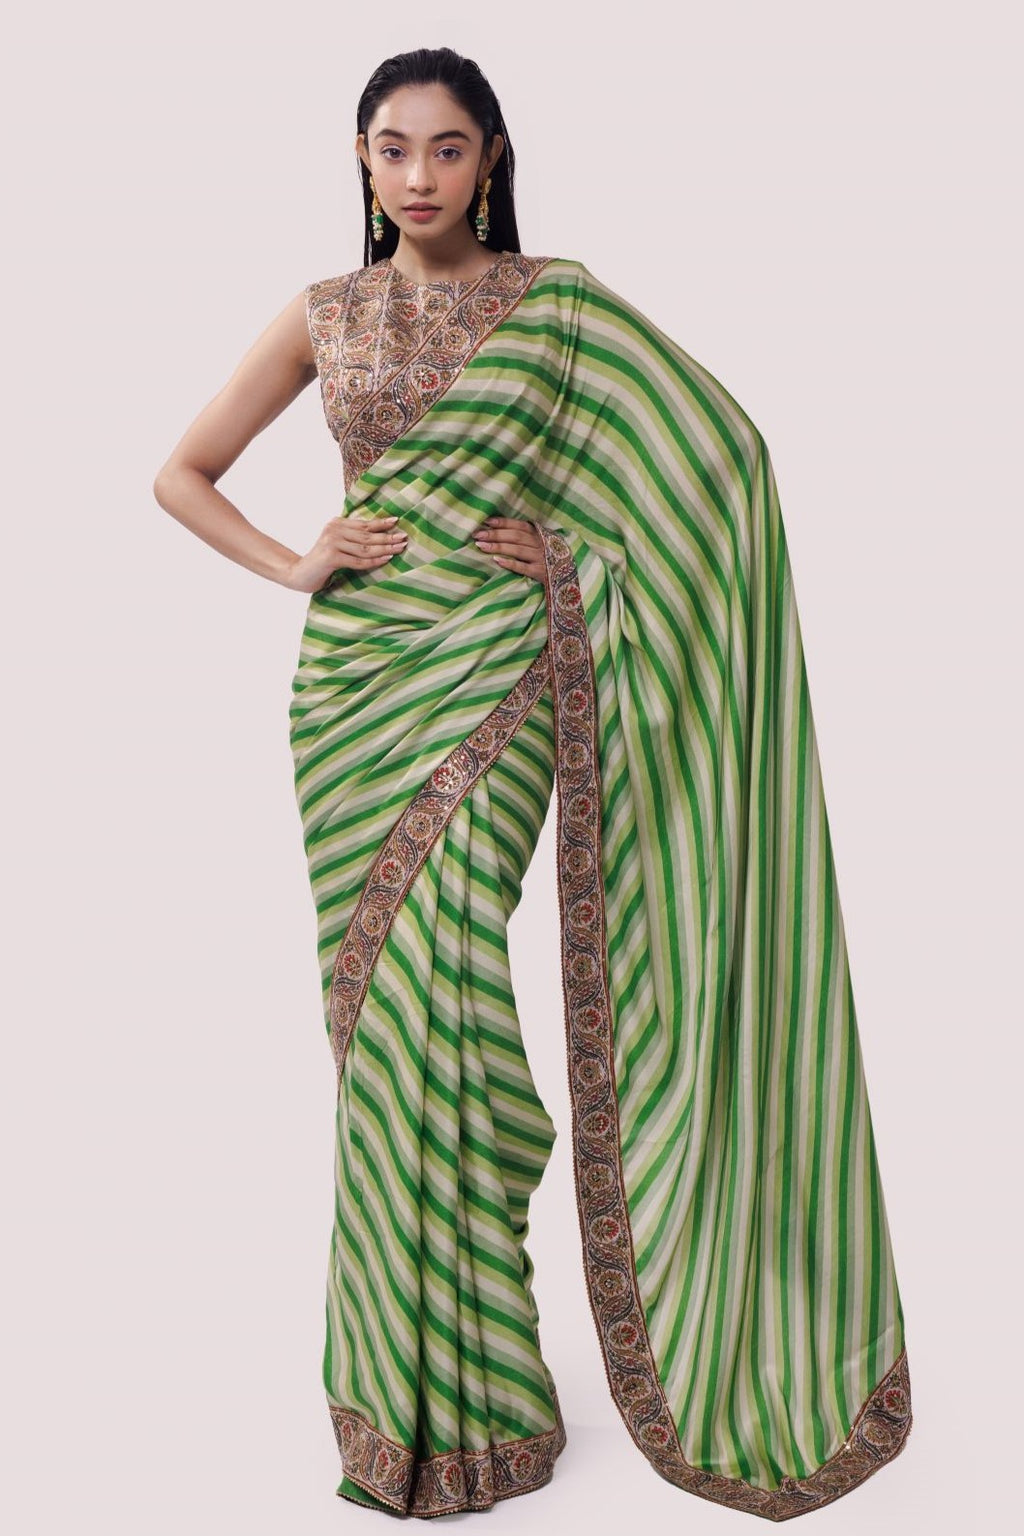 Shop an alluring green satin Saree featuring stripe print and aari work is a perfect choice for parties! It comes with a designer sleeveless saree blouse. Make a fashion statement at weddings with stunning designer sarees, embroidered sarees with blouses, wedding sarees, and handloom sarees from Pure Elegance Indian fashion store in the USA.